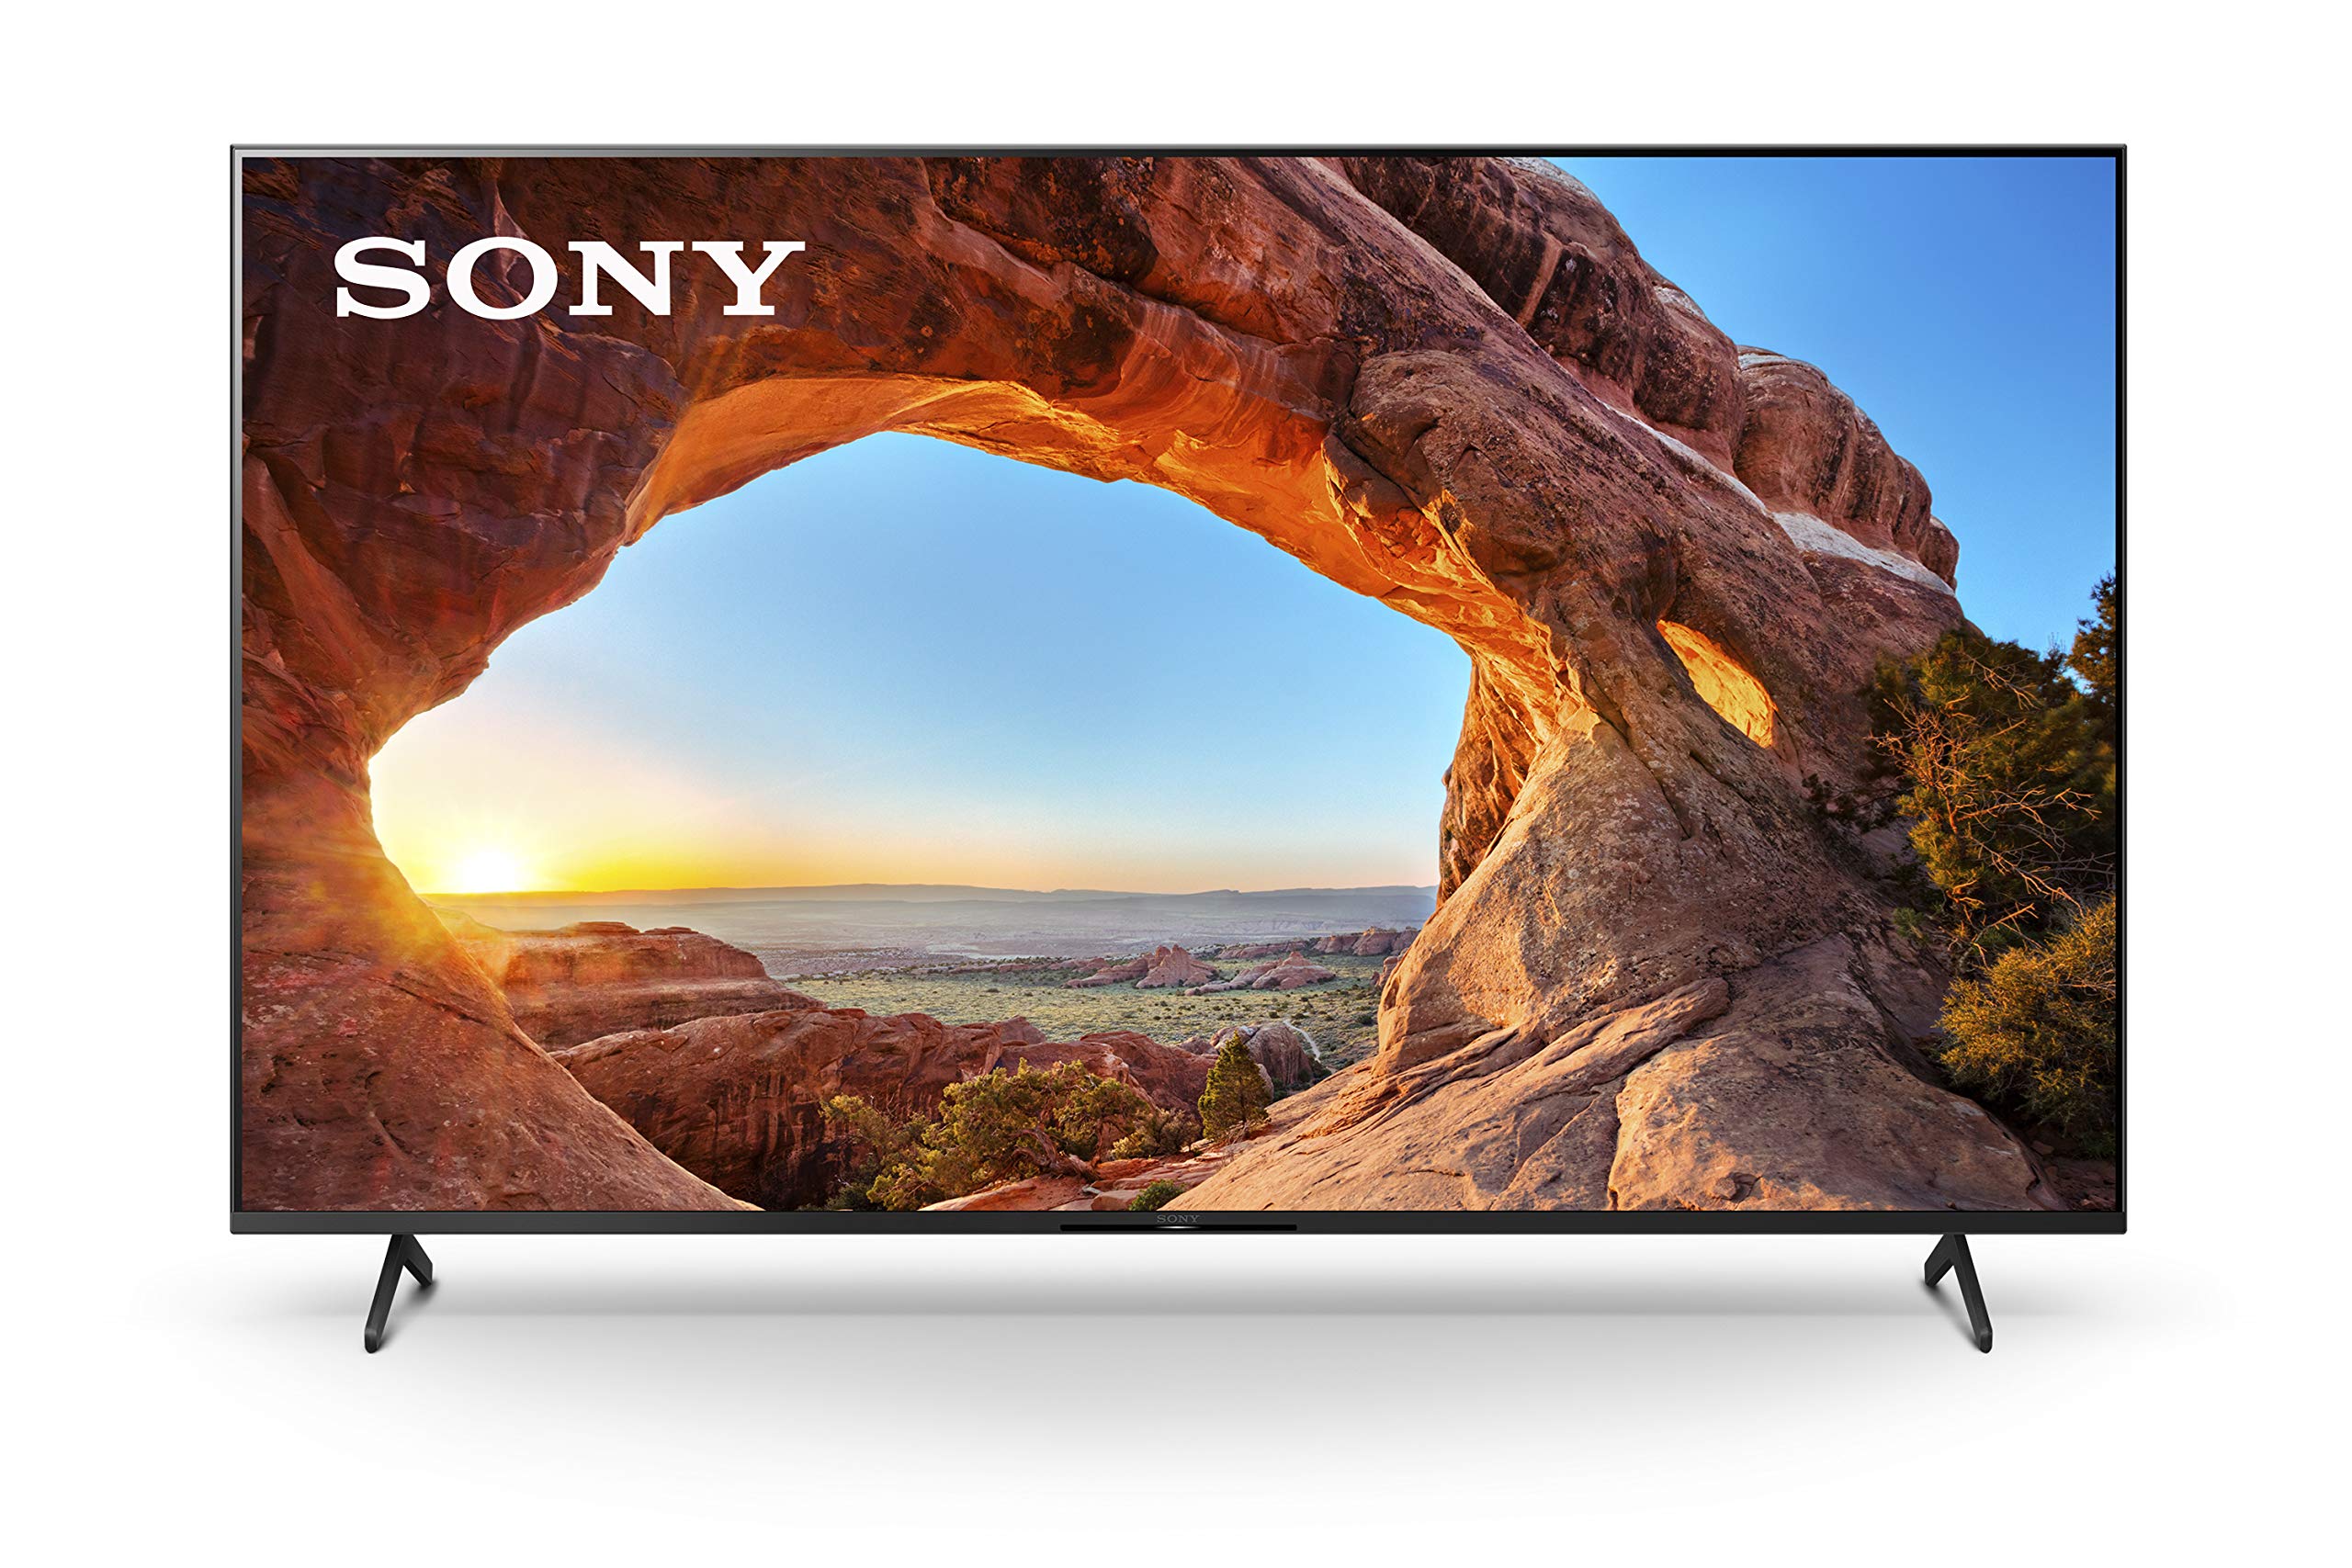 Sony X85J 65 Inch TV: 4K Ultra HD LED Smart Google TV with Native 120HZ  Refresh Rate, Dolby Vision HDR KD65X85J- 2021 Model - $998.00 w/ Free  Shipping @